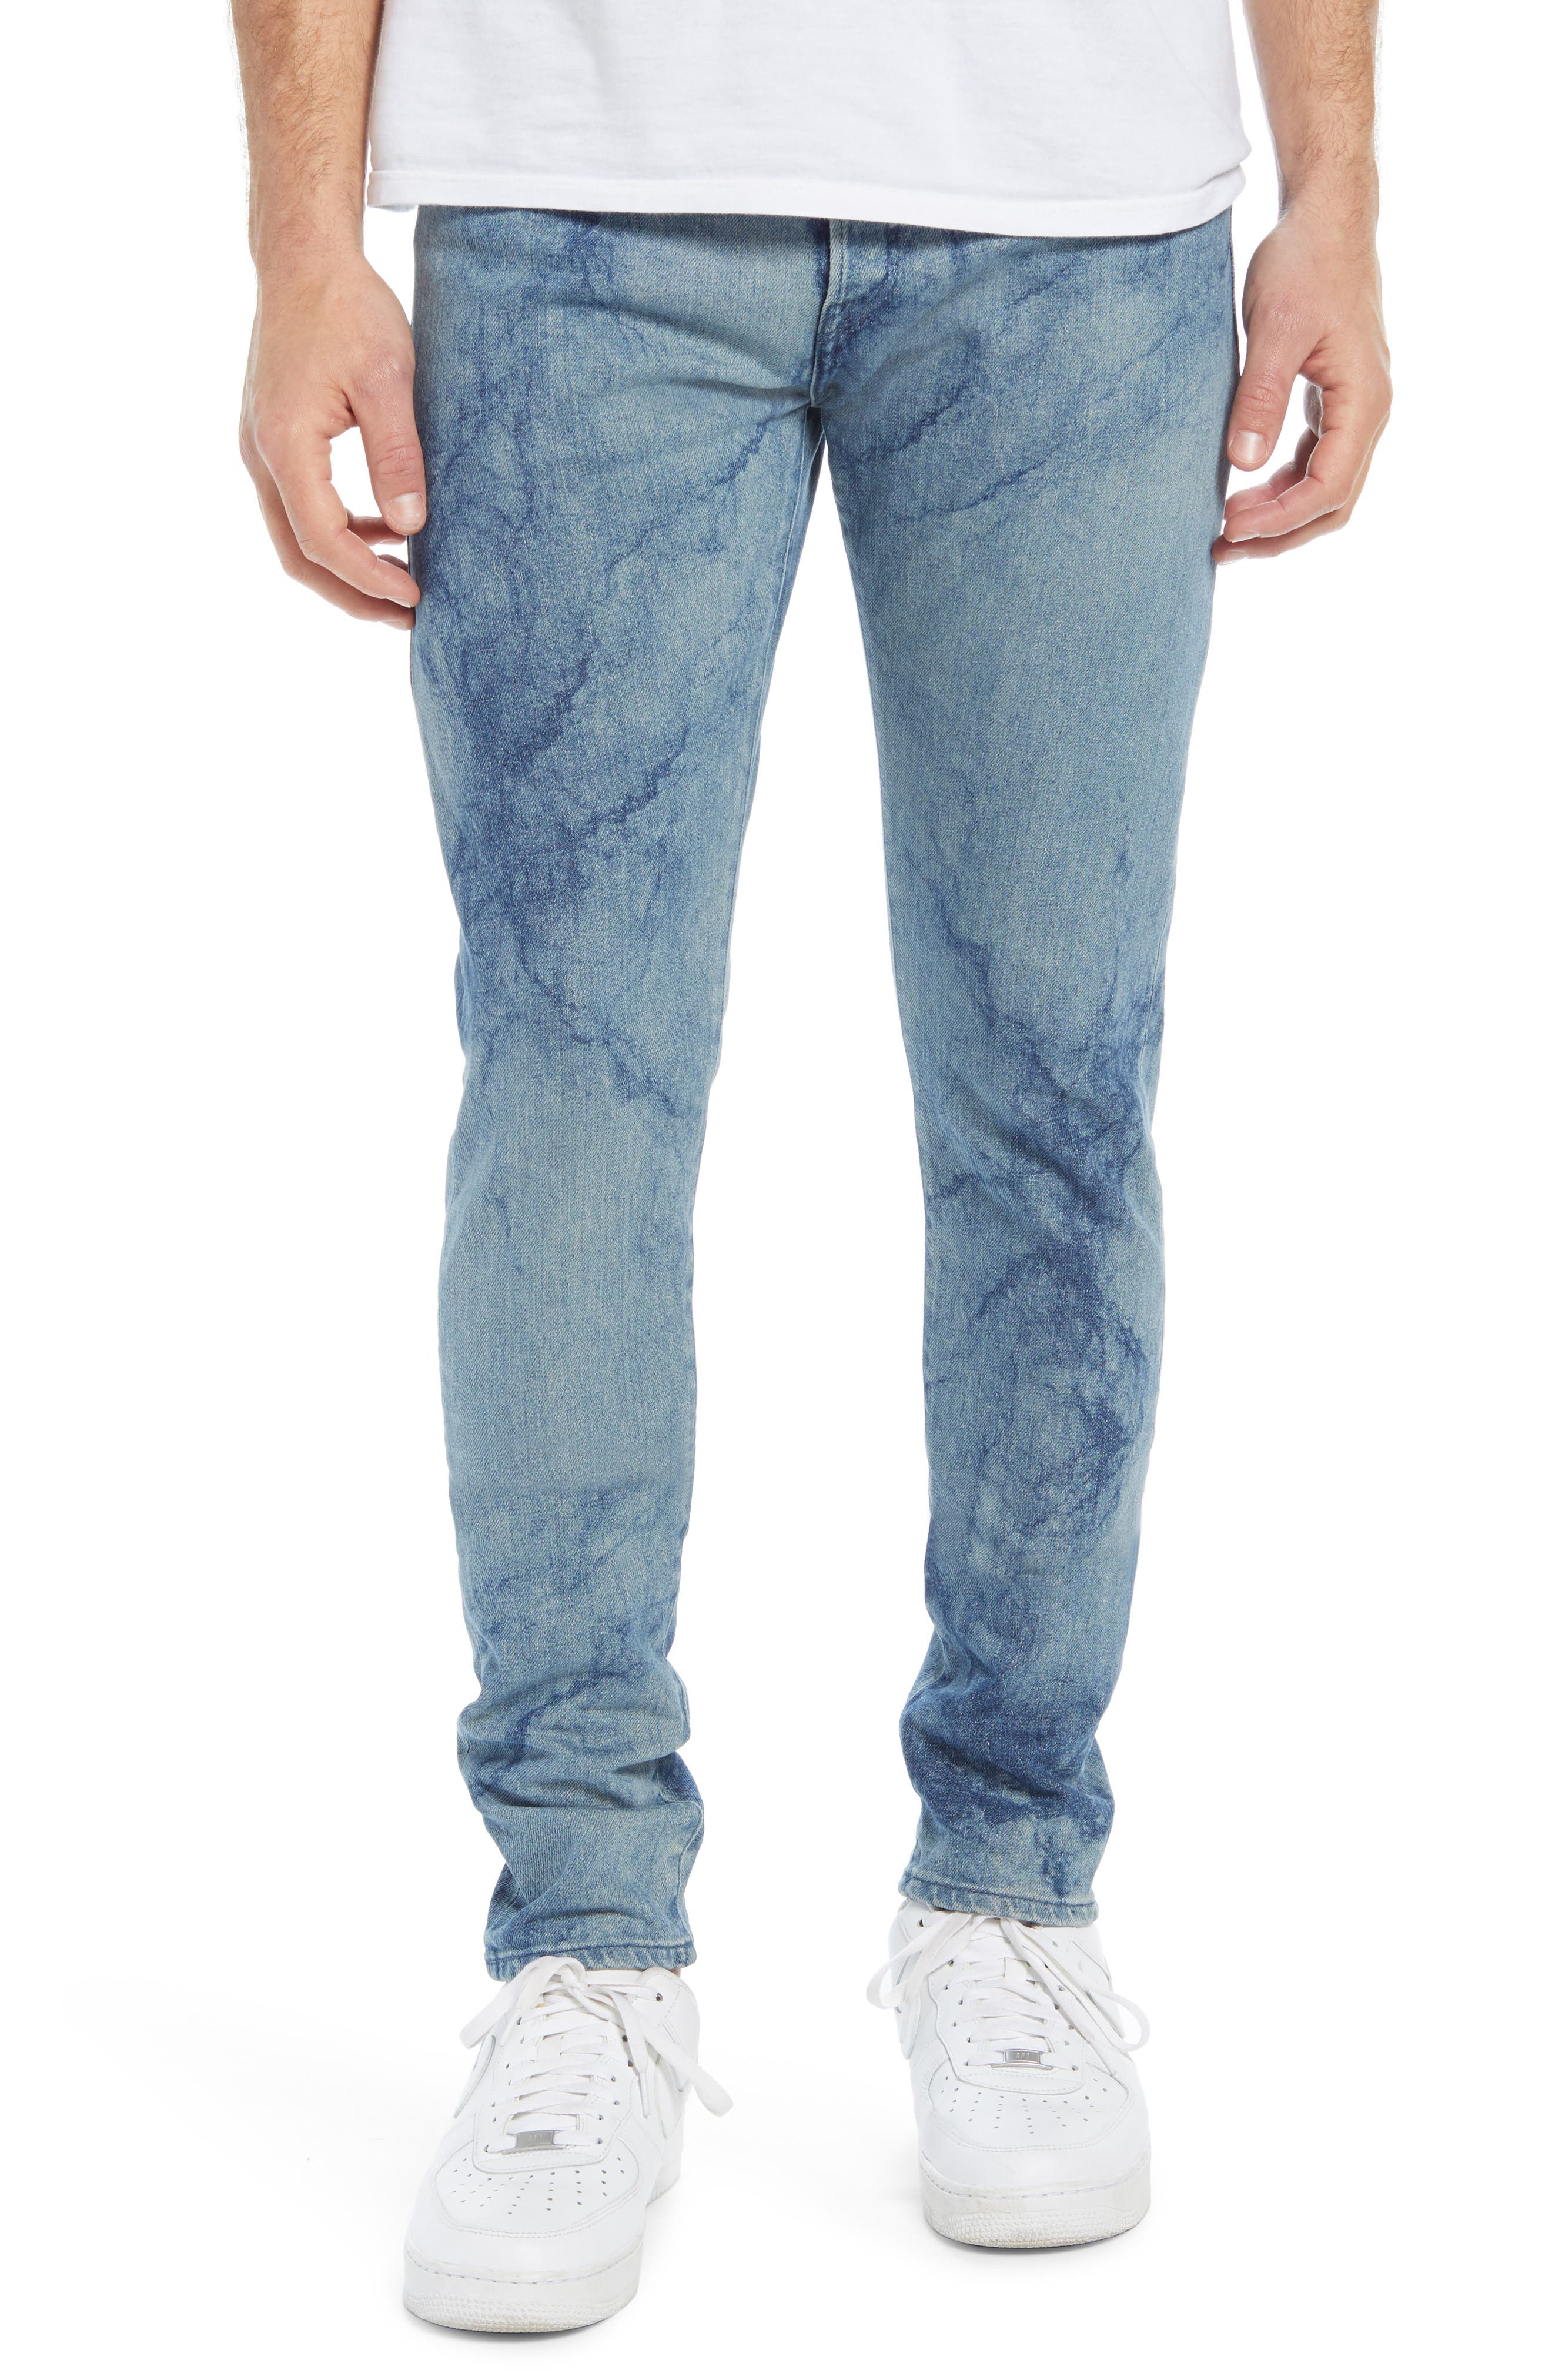 John Elliott The Cast 2 Slim Tapered Fit Jeans in Shallows at Nordstrom, Size 29 Us